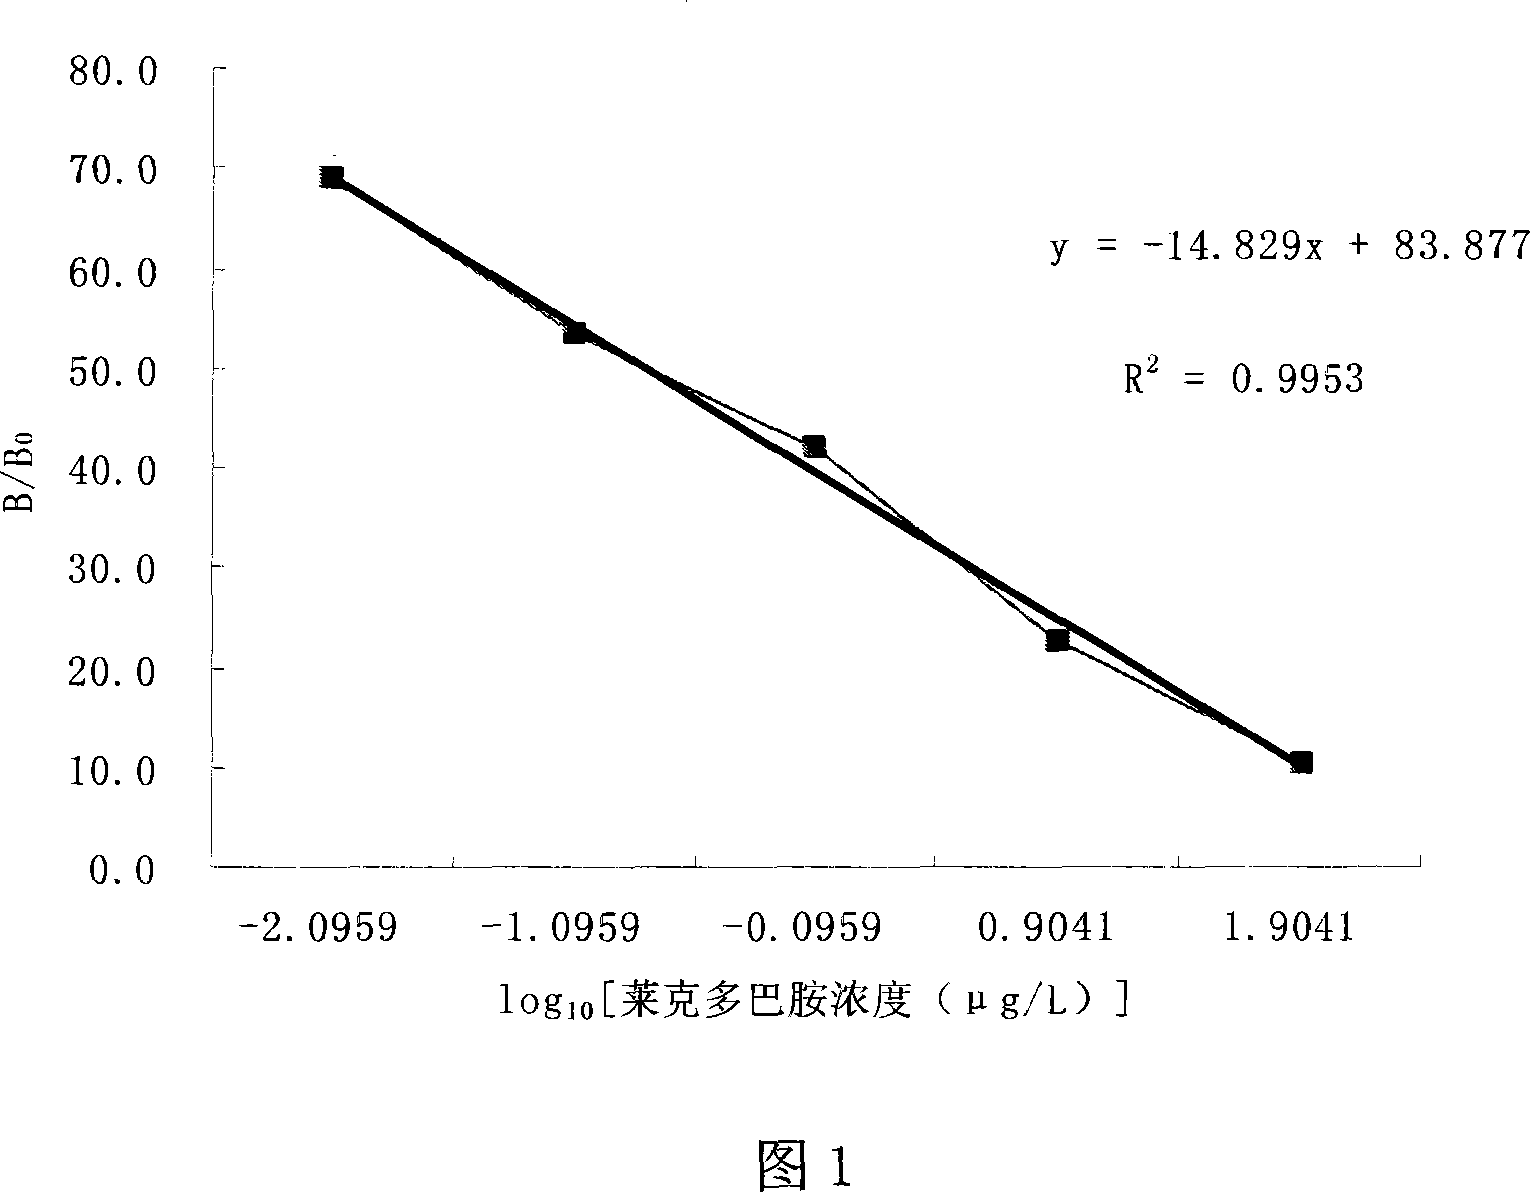 ELISA kit for detecting ractopamine residue and method of use thereof